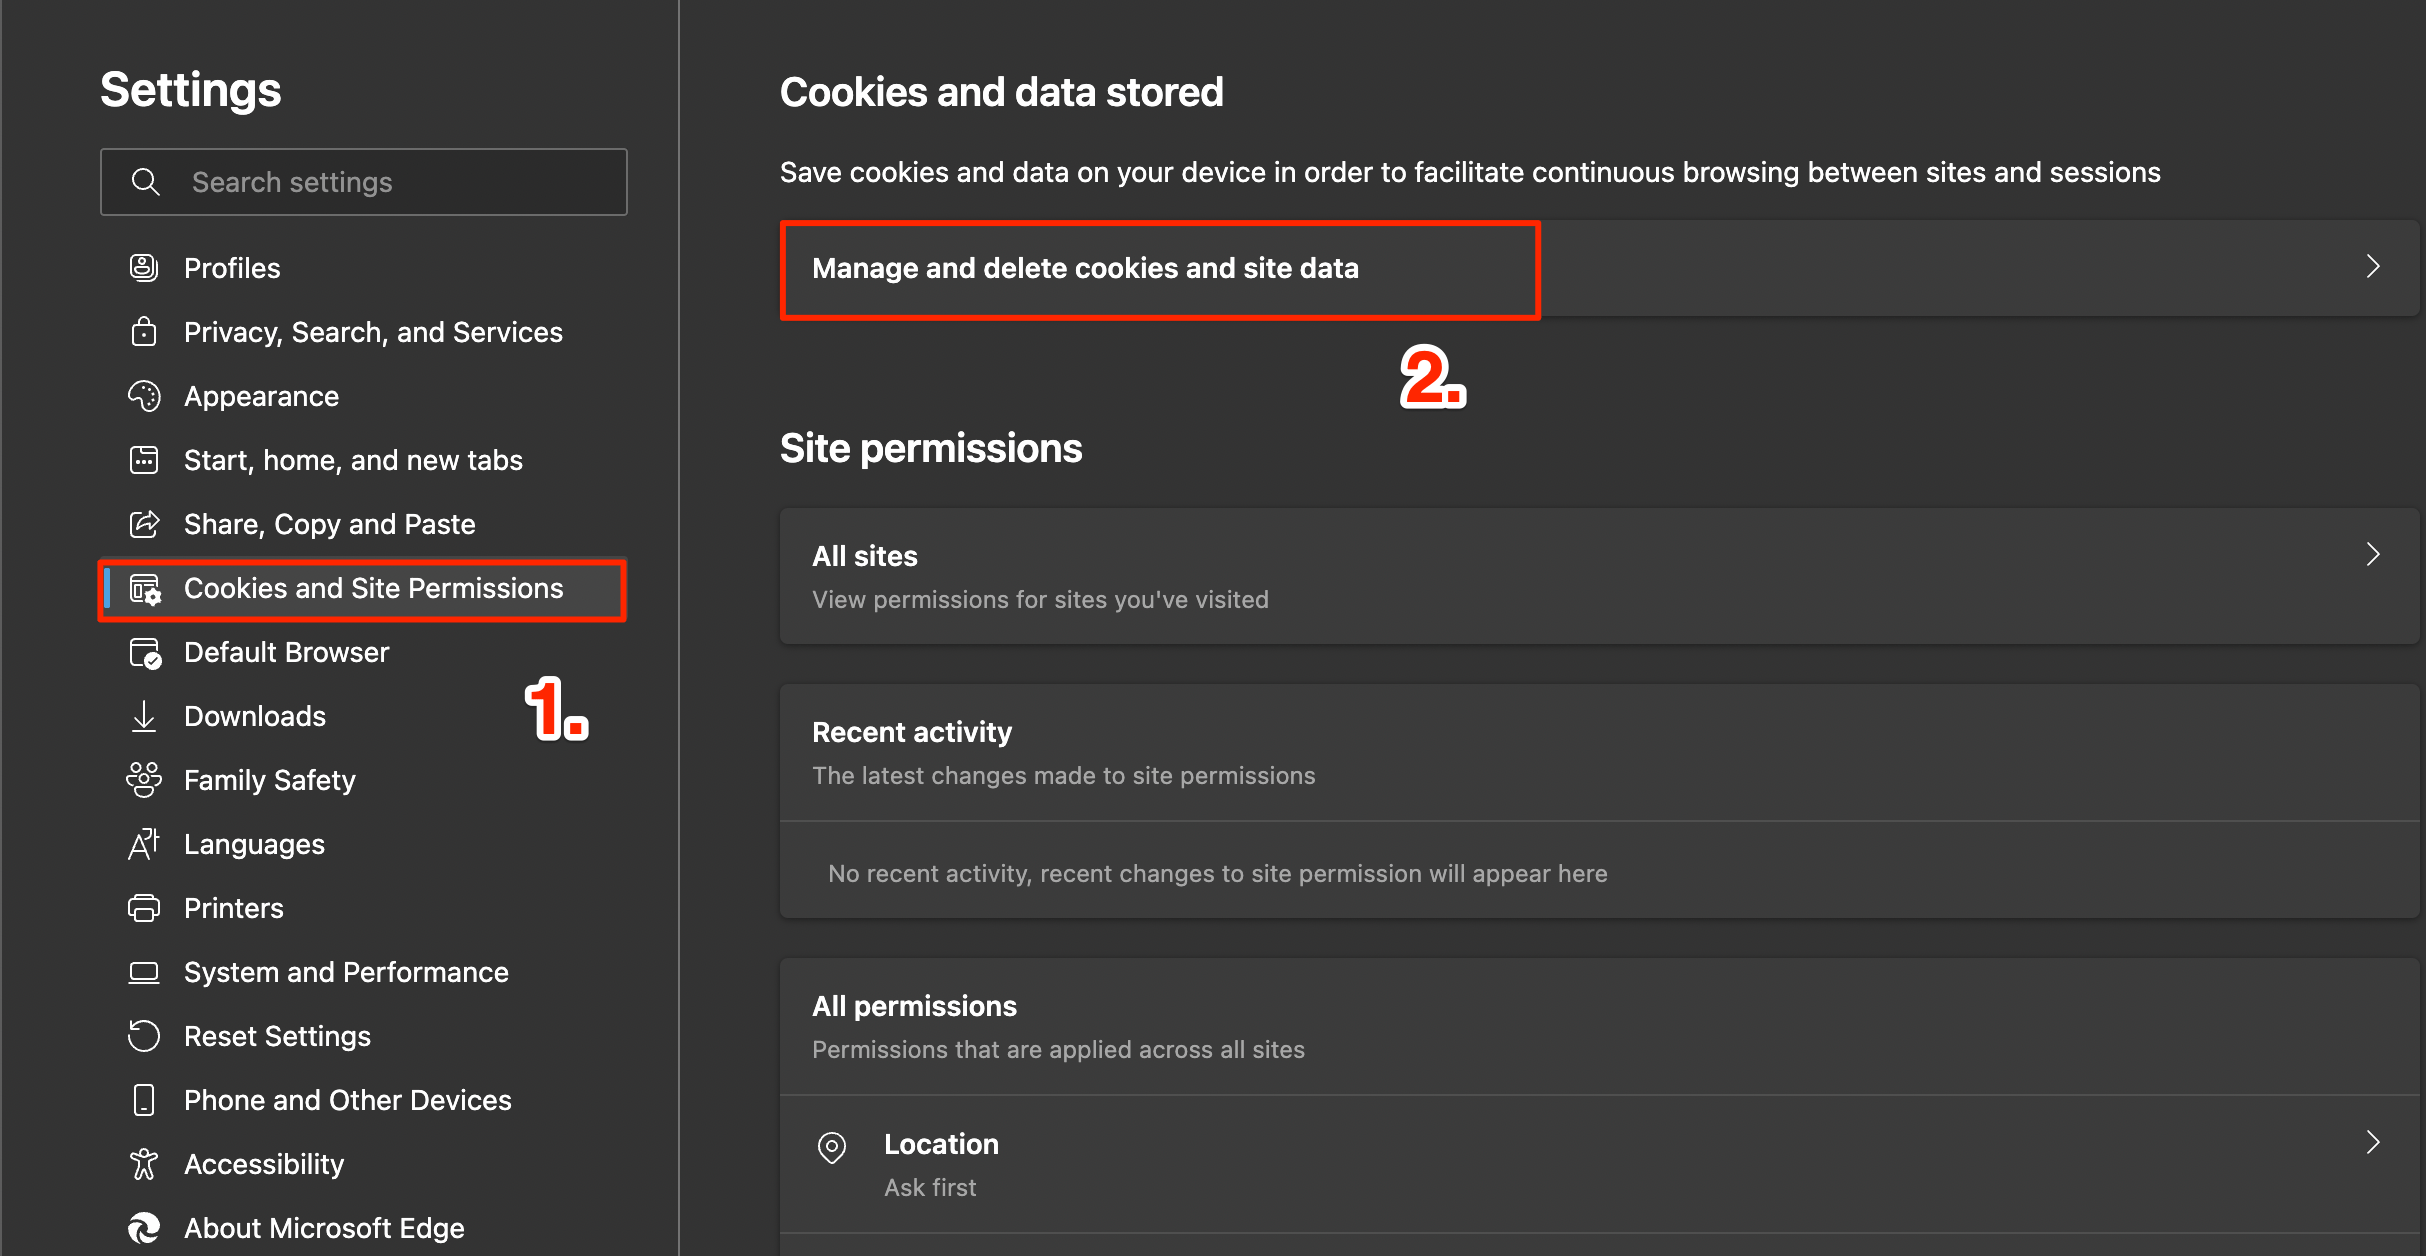 Manage and delete cookies and site data